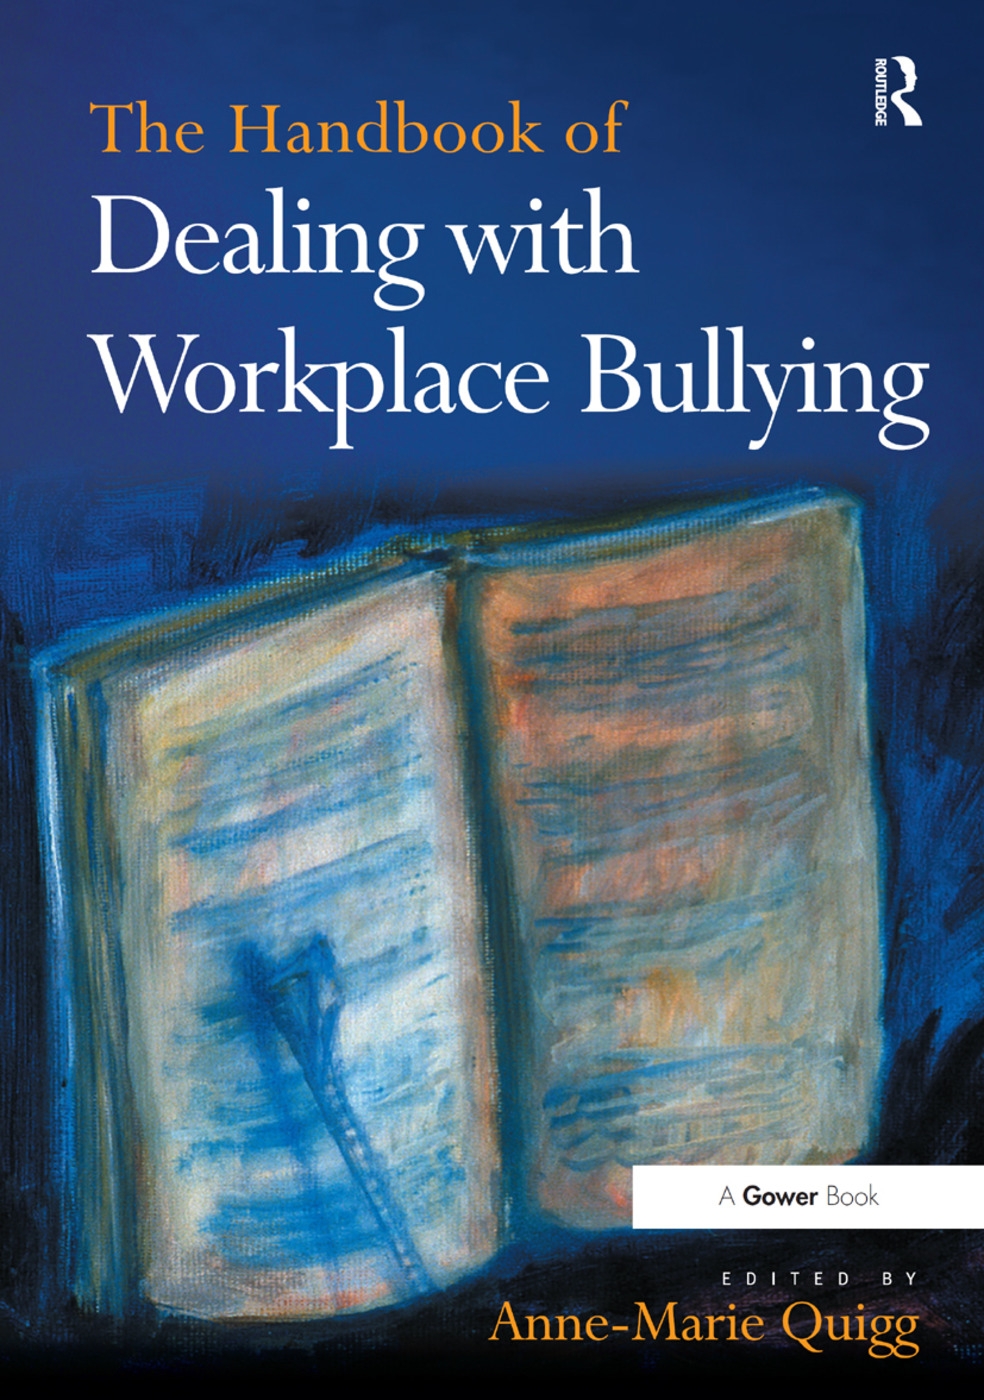 The Handbook of Dealing with Workplace Bullying